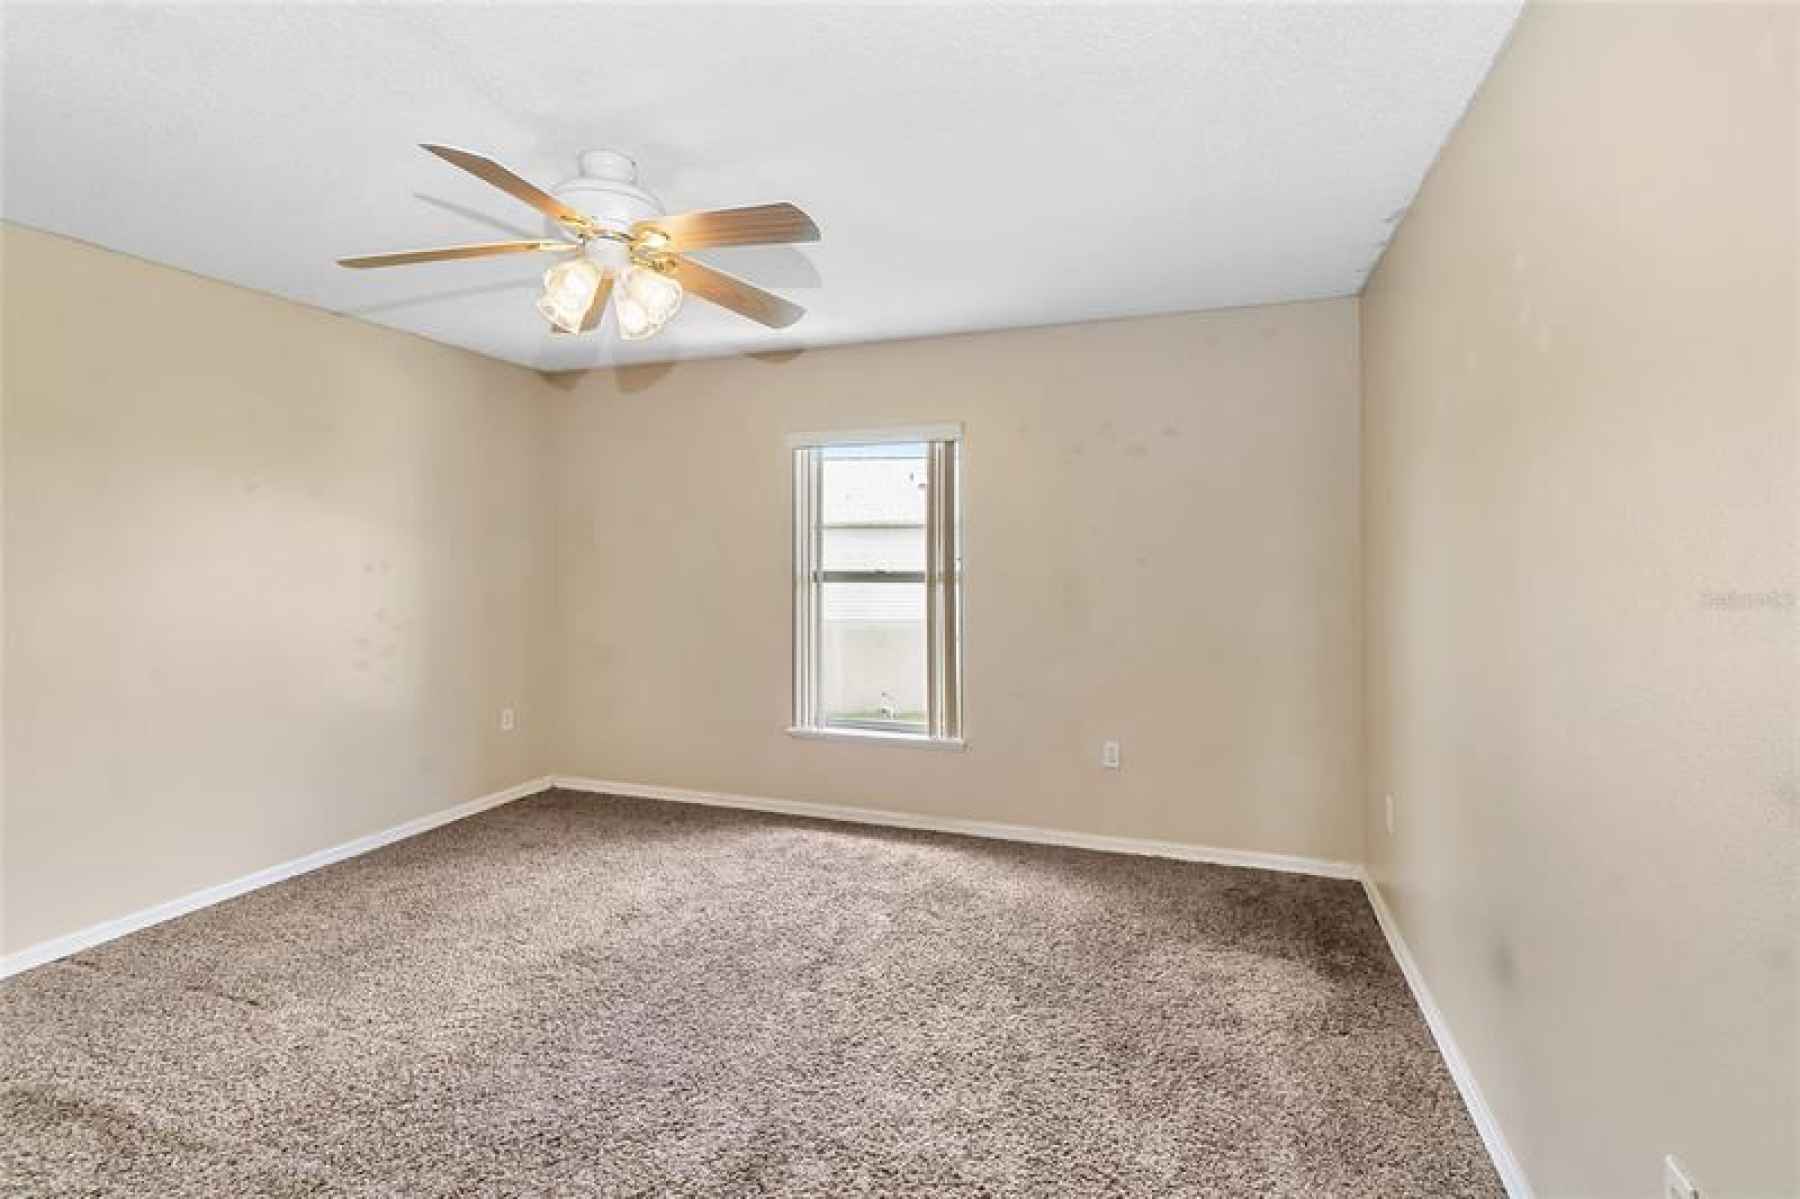 4th bedroom would be perfect for work-from-home office, craft room or playroom.